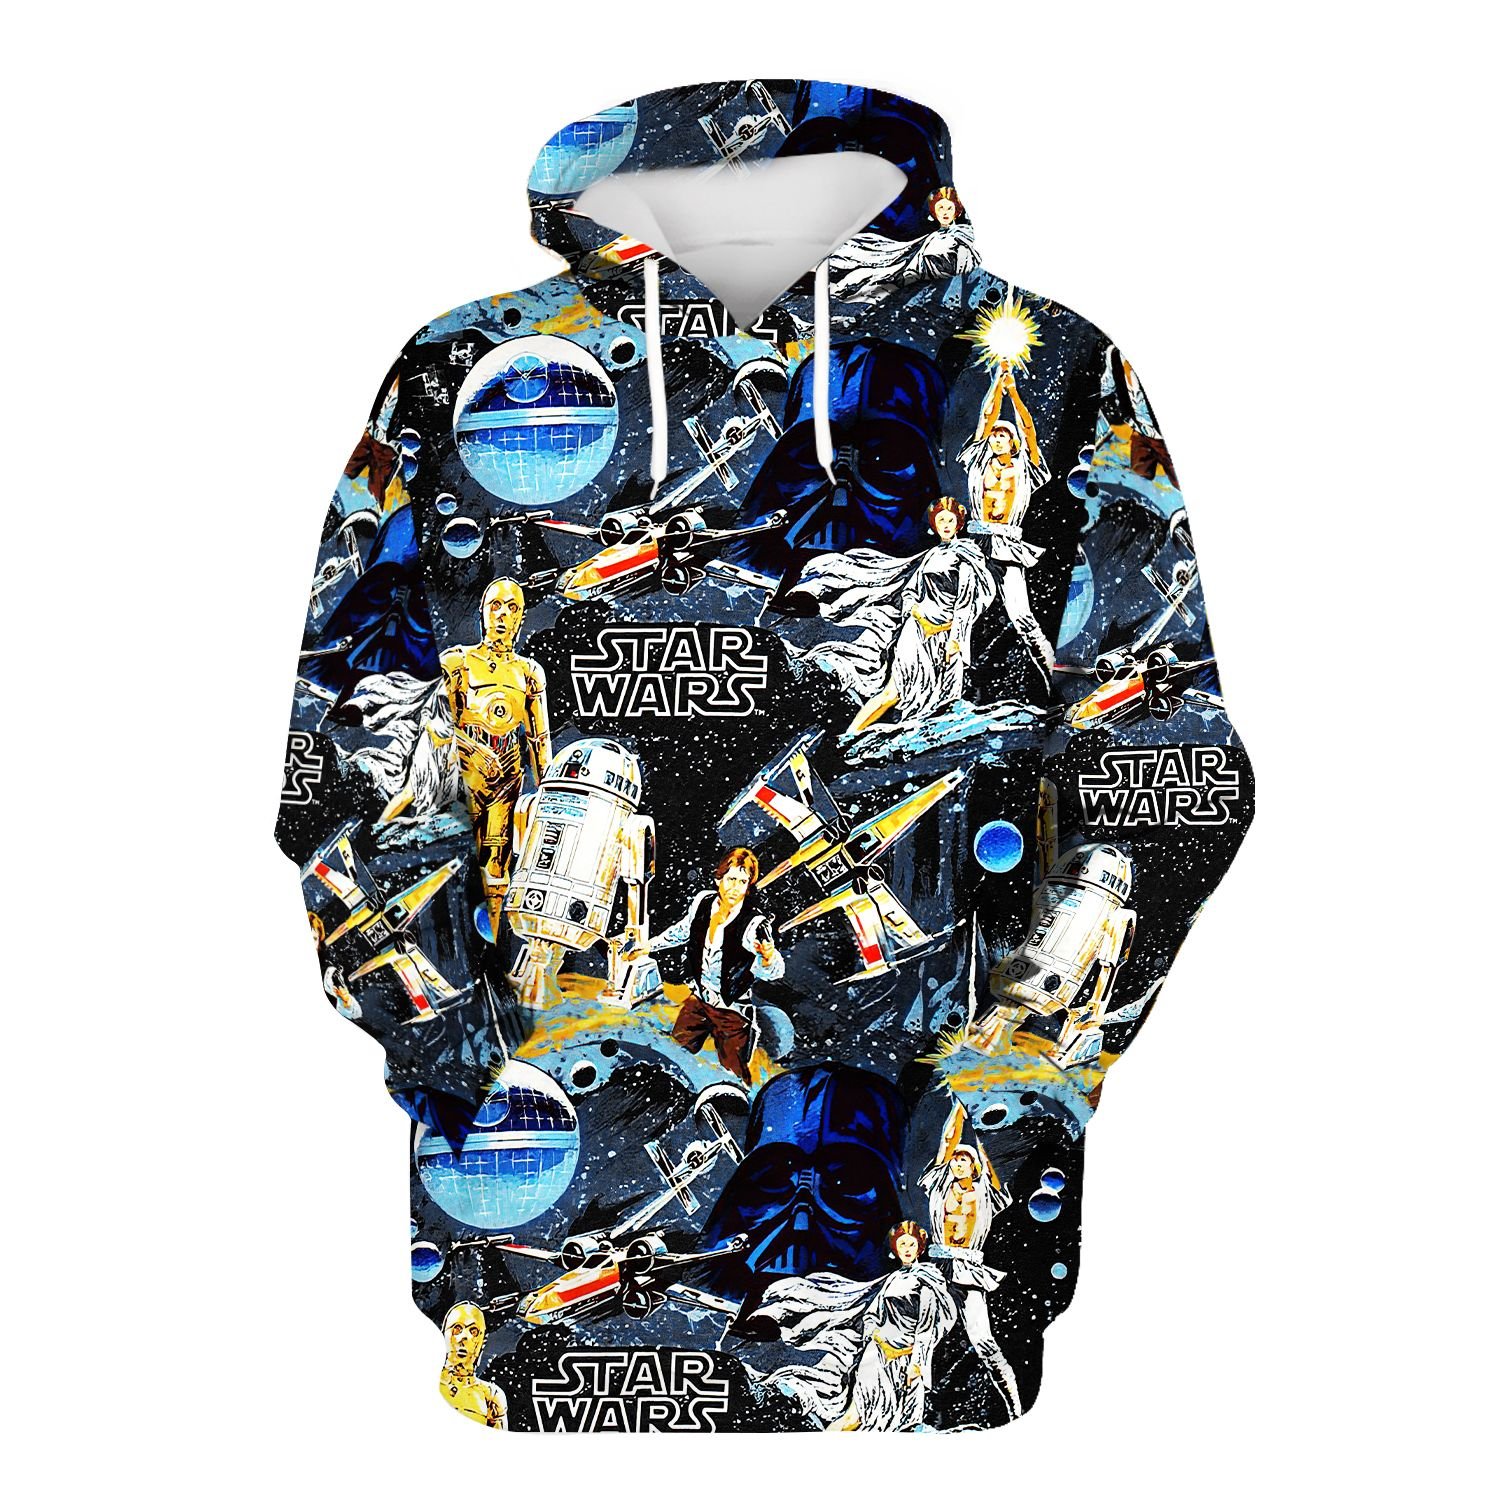 Star Wars 3d over print hoodie and sweatshirt – LIMITED EDITION